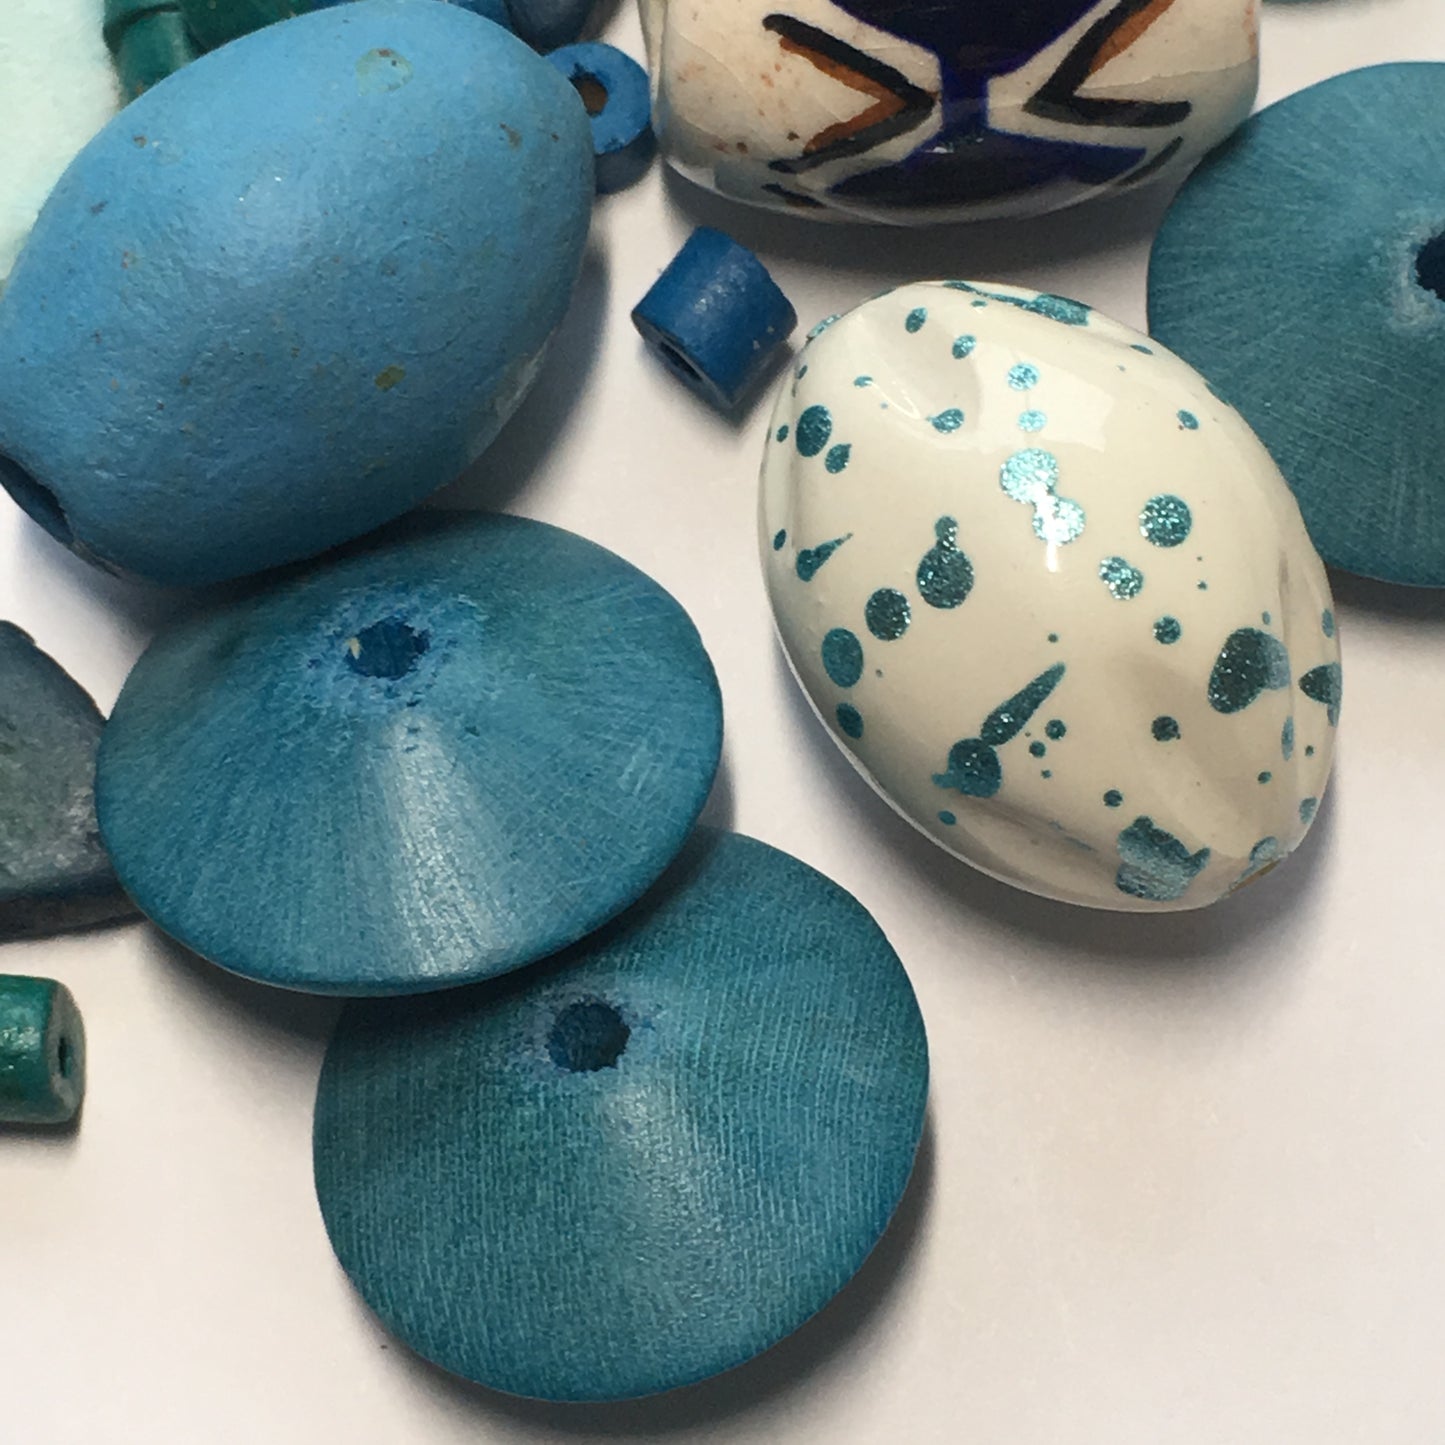 Blue and White Ceramic, Clay and Wooden Bead Mix - 82 Beads